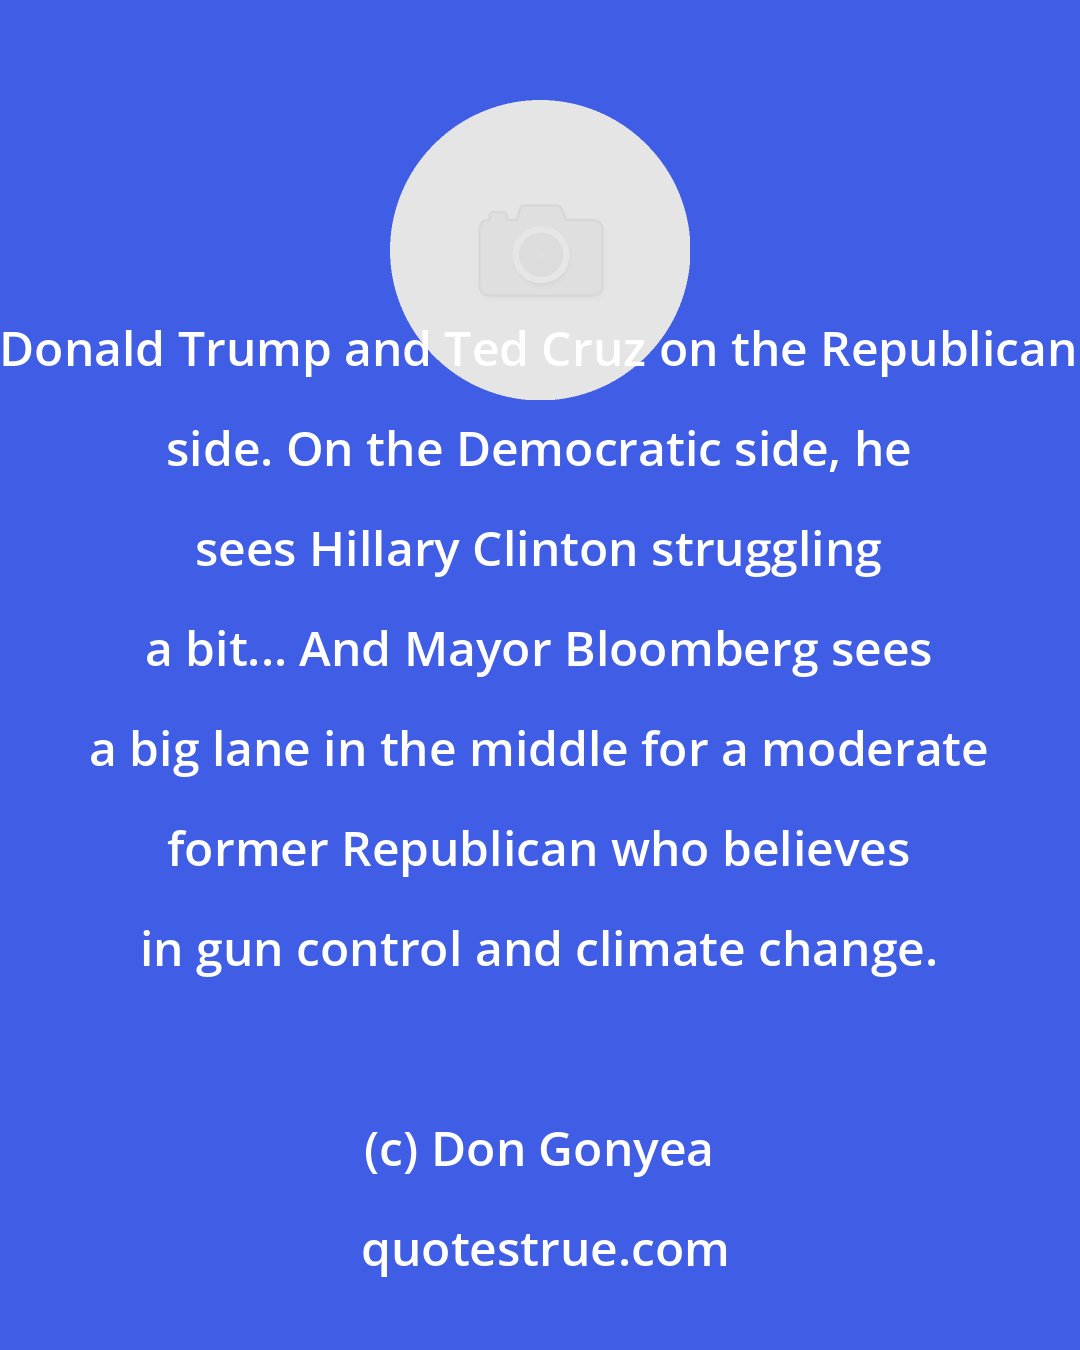 Don Gonyea: Donald Trump and Ted Cruz on the Republican side. On the Democratic side, he sees Hillary Clinton struggling a bit... And Mayor Bloomberg sees a big lane in the middle for a moderate former Republican who believes in gun control and climate change.